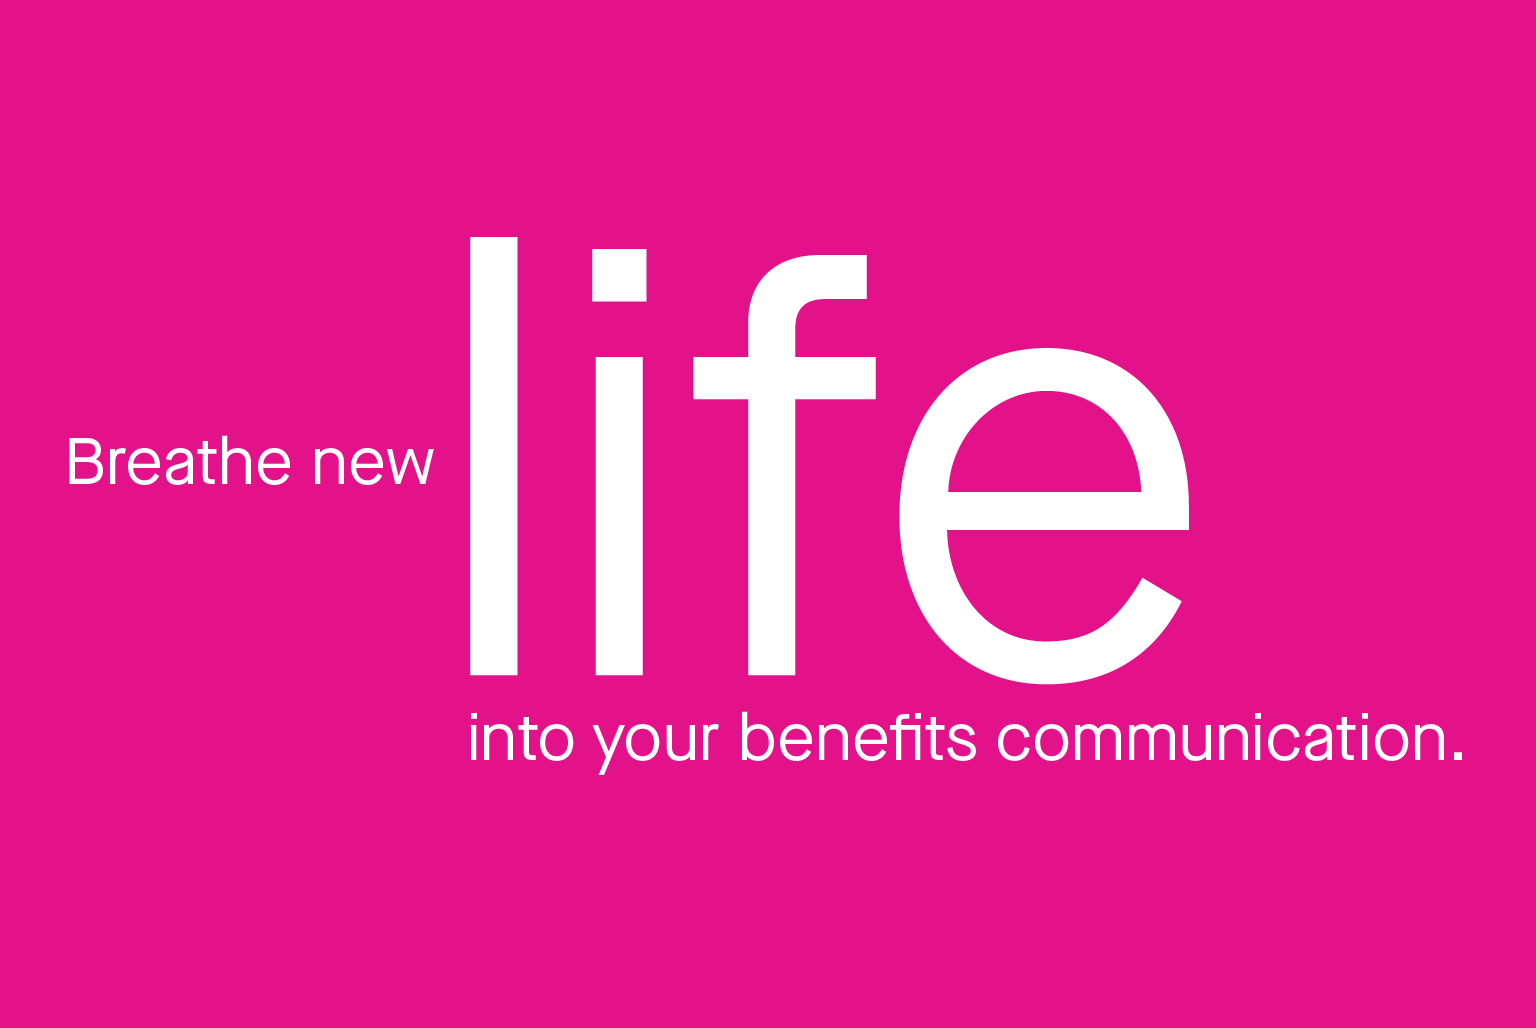 Video: Breathe new life into your benefits communication